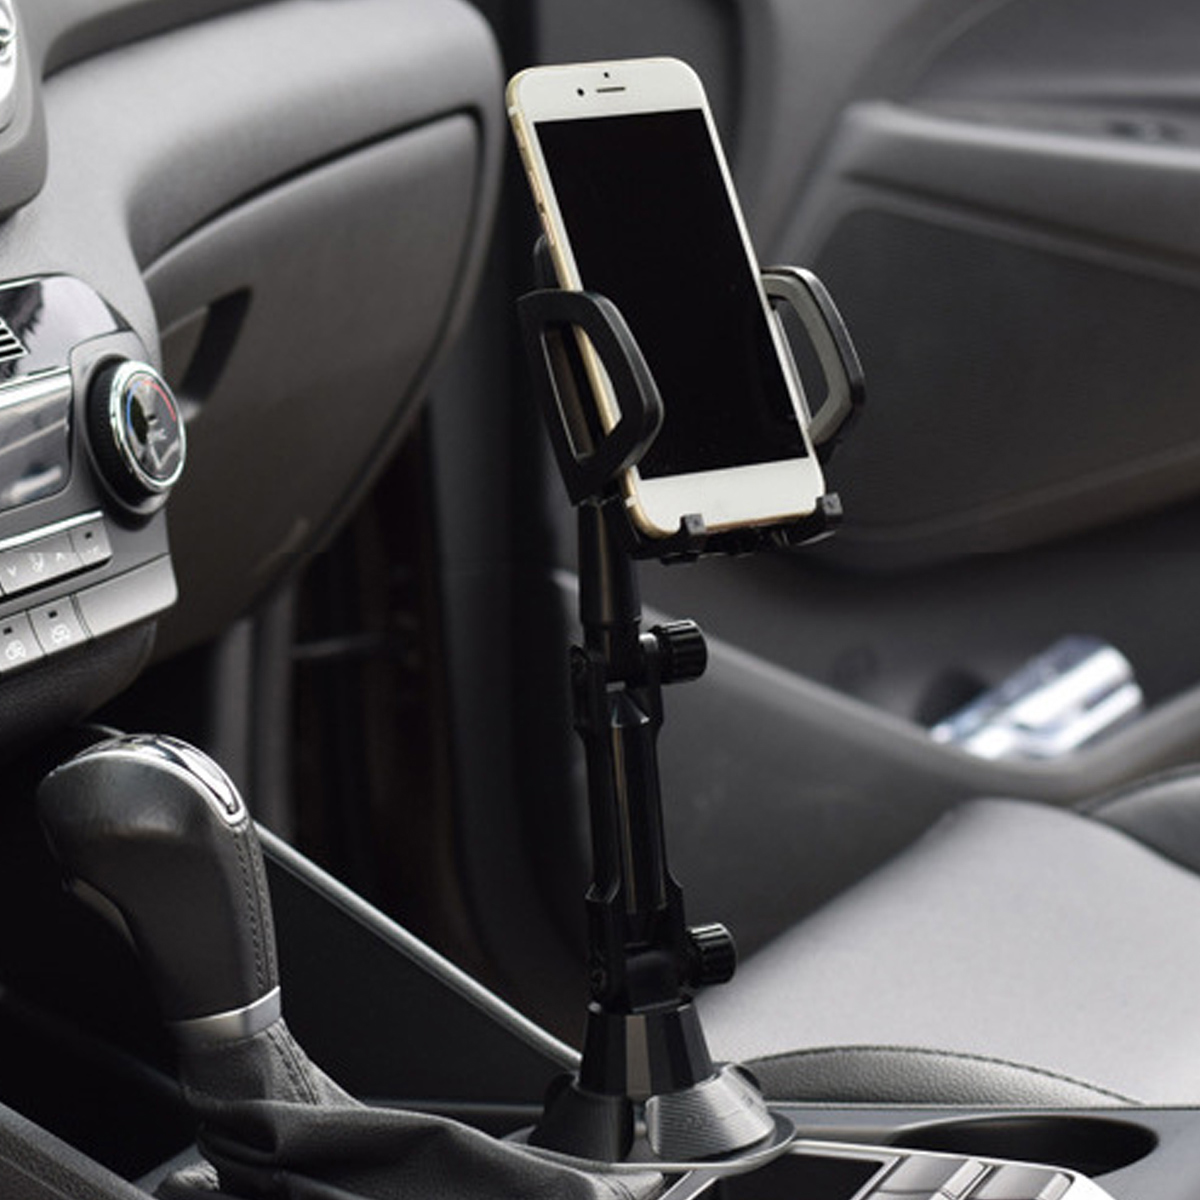 Universal-360-Rotation-Flexible-Arm-Car-Phone-Mount-Gooseneck-Cup-Holder-for-5-95cm-Width-Cell-Phone-1718228-9